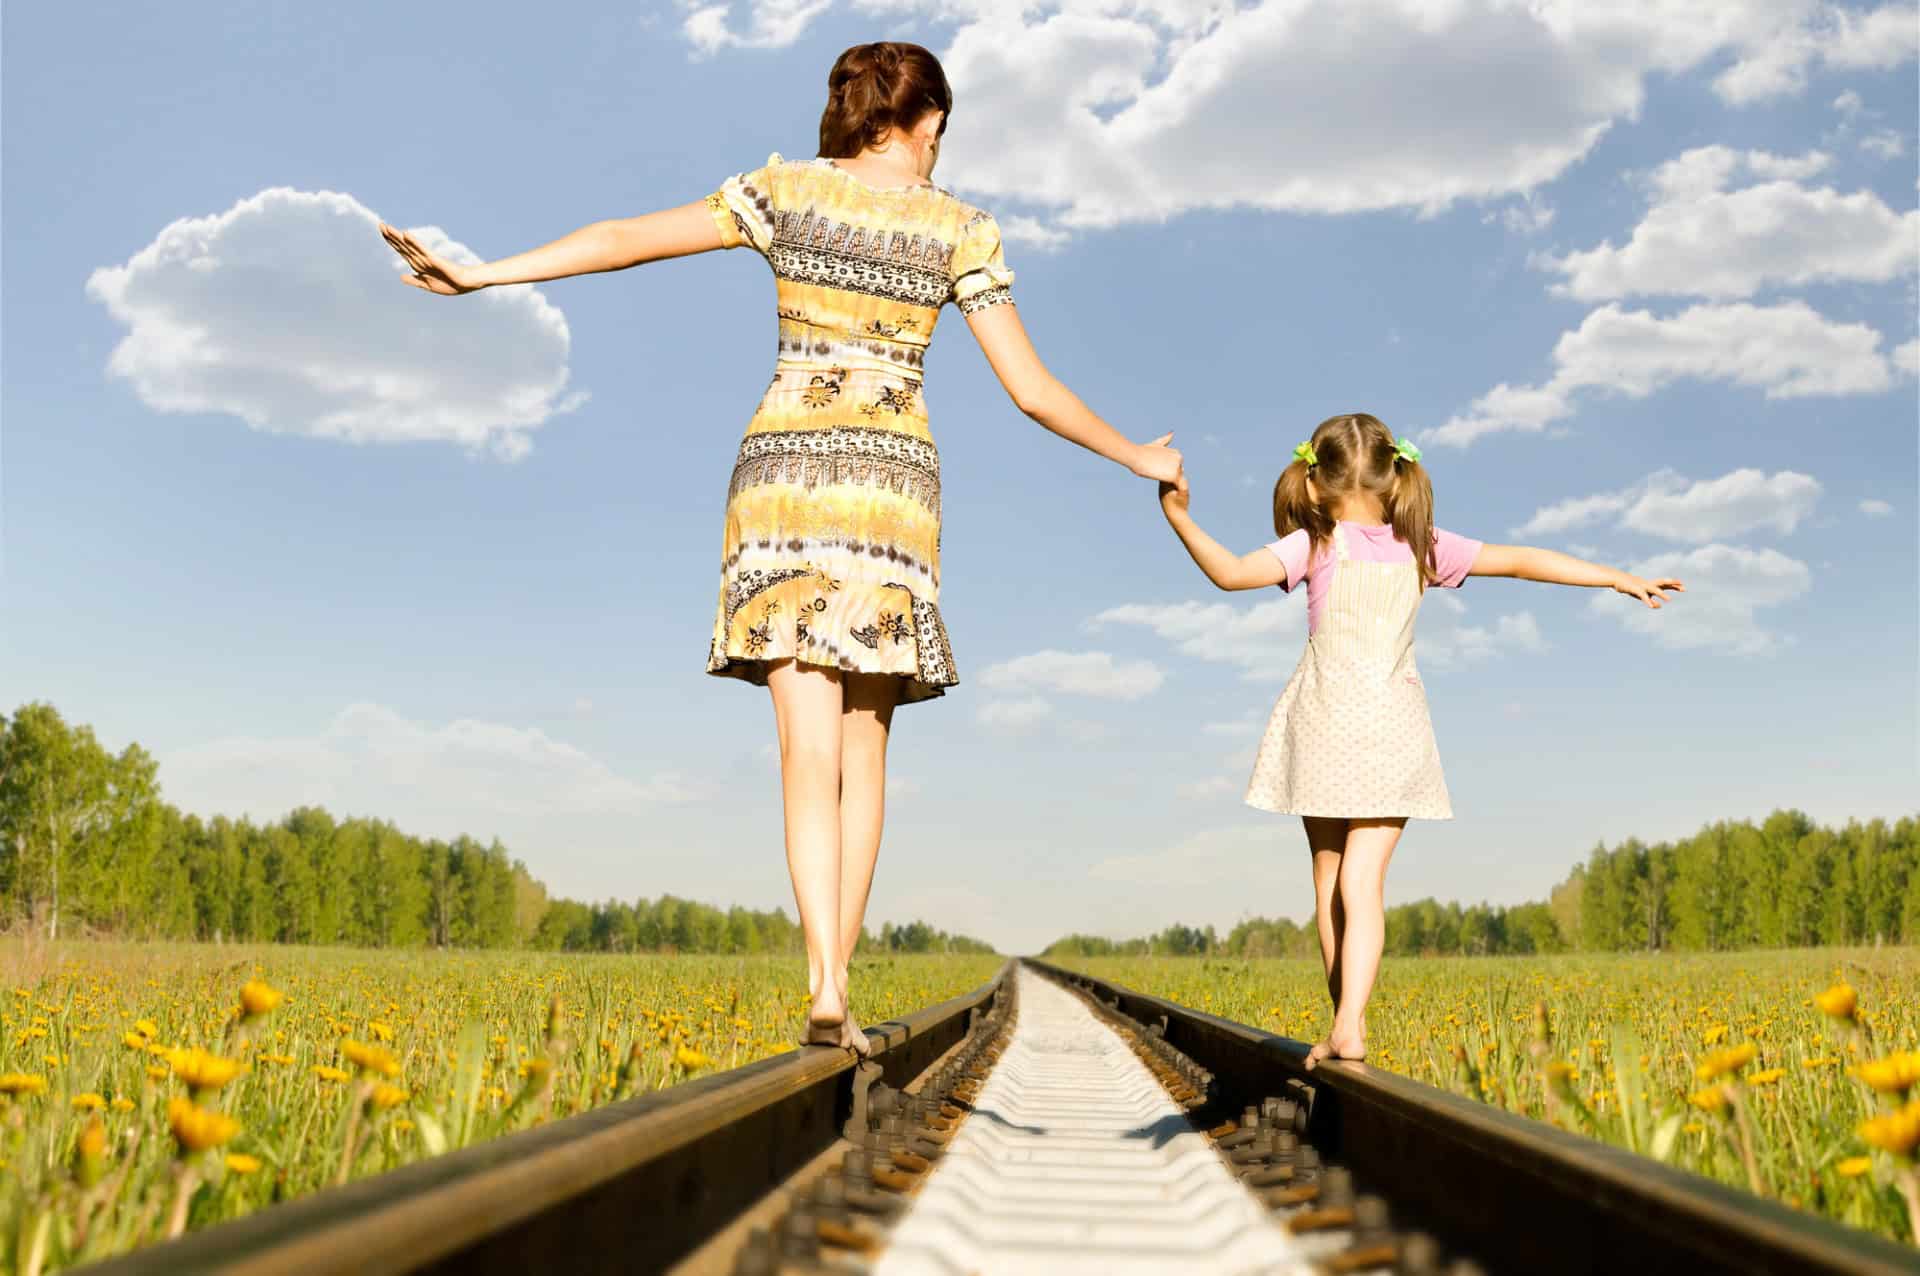 Mom and daughter walk together on railroad tracks